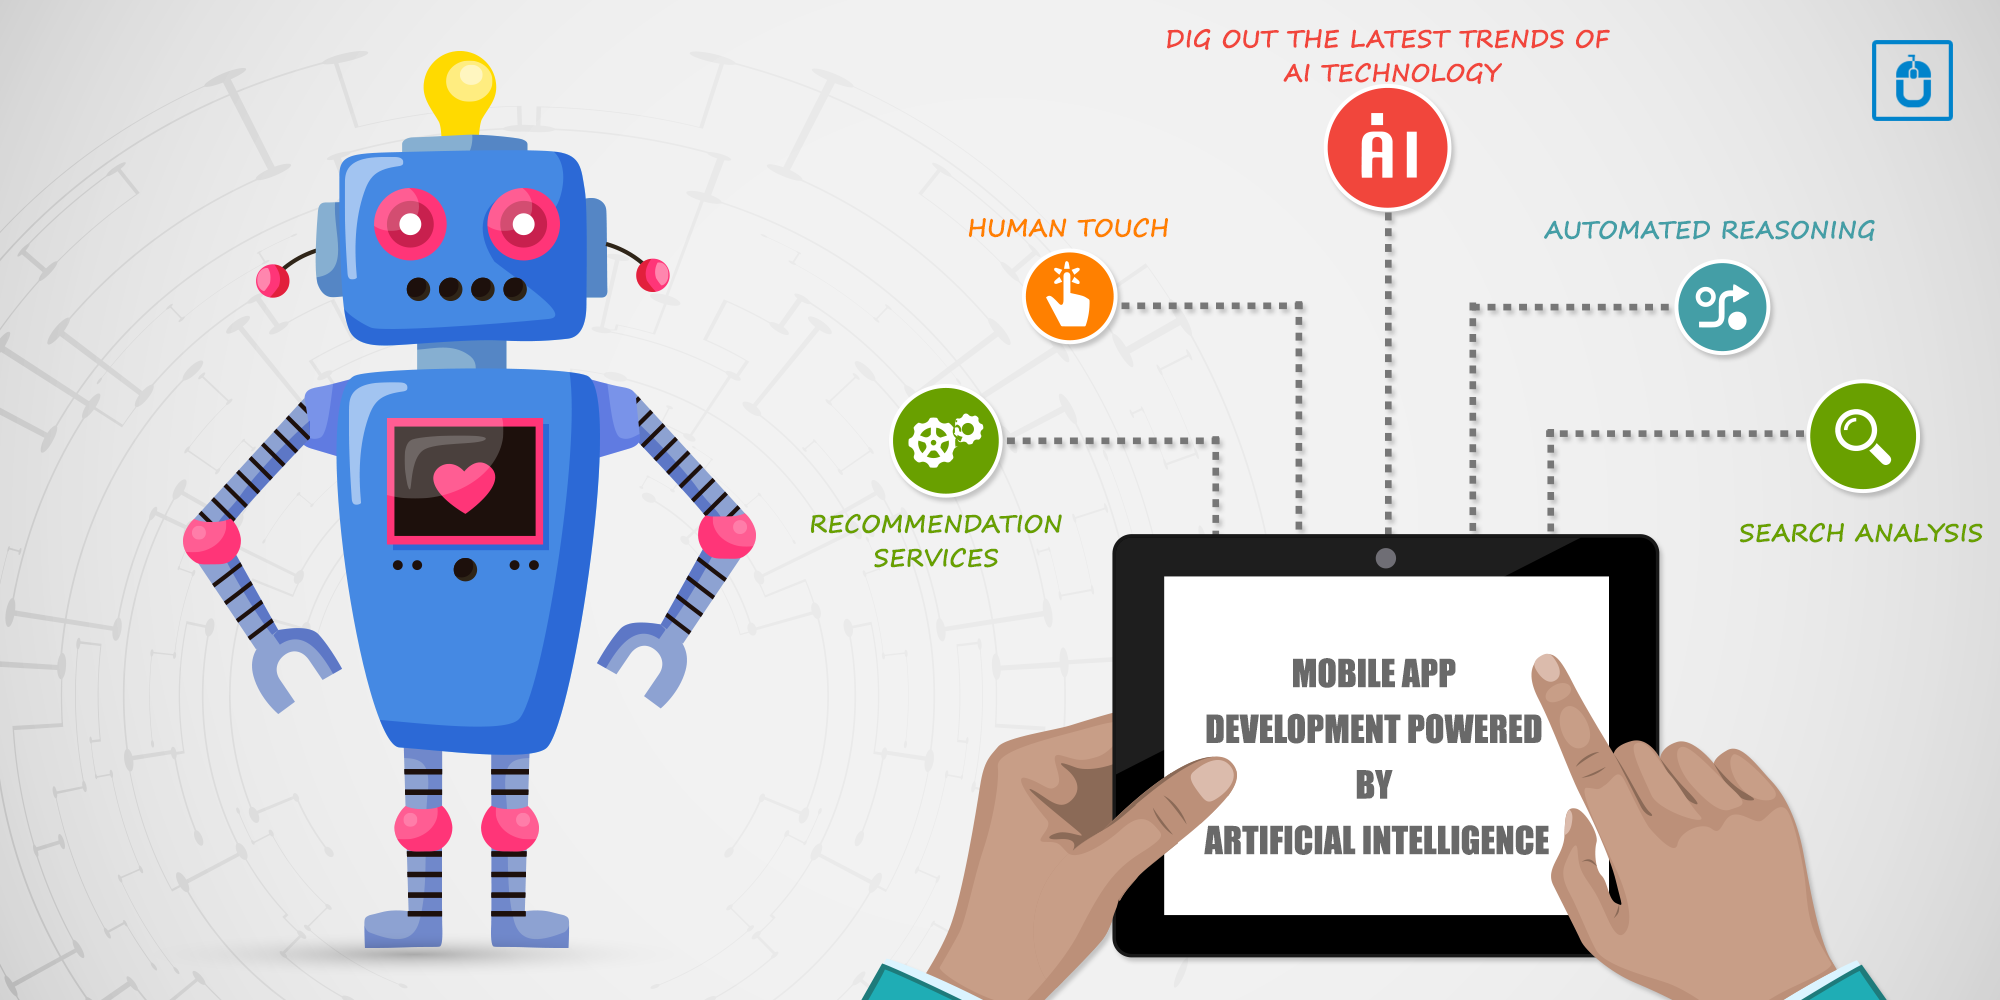 Mobile App Development Powered By Artificial Intelligence